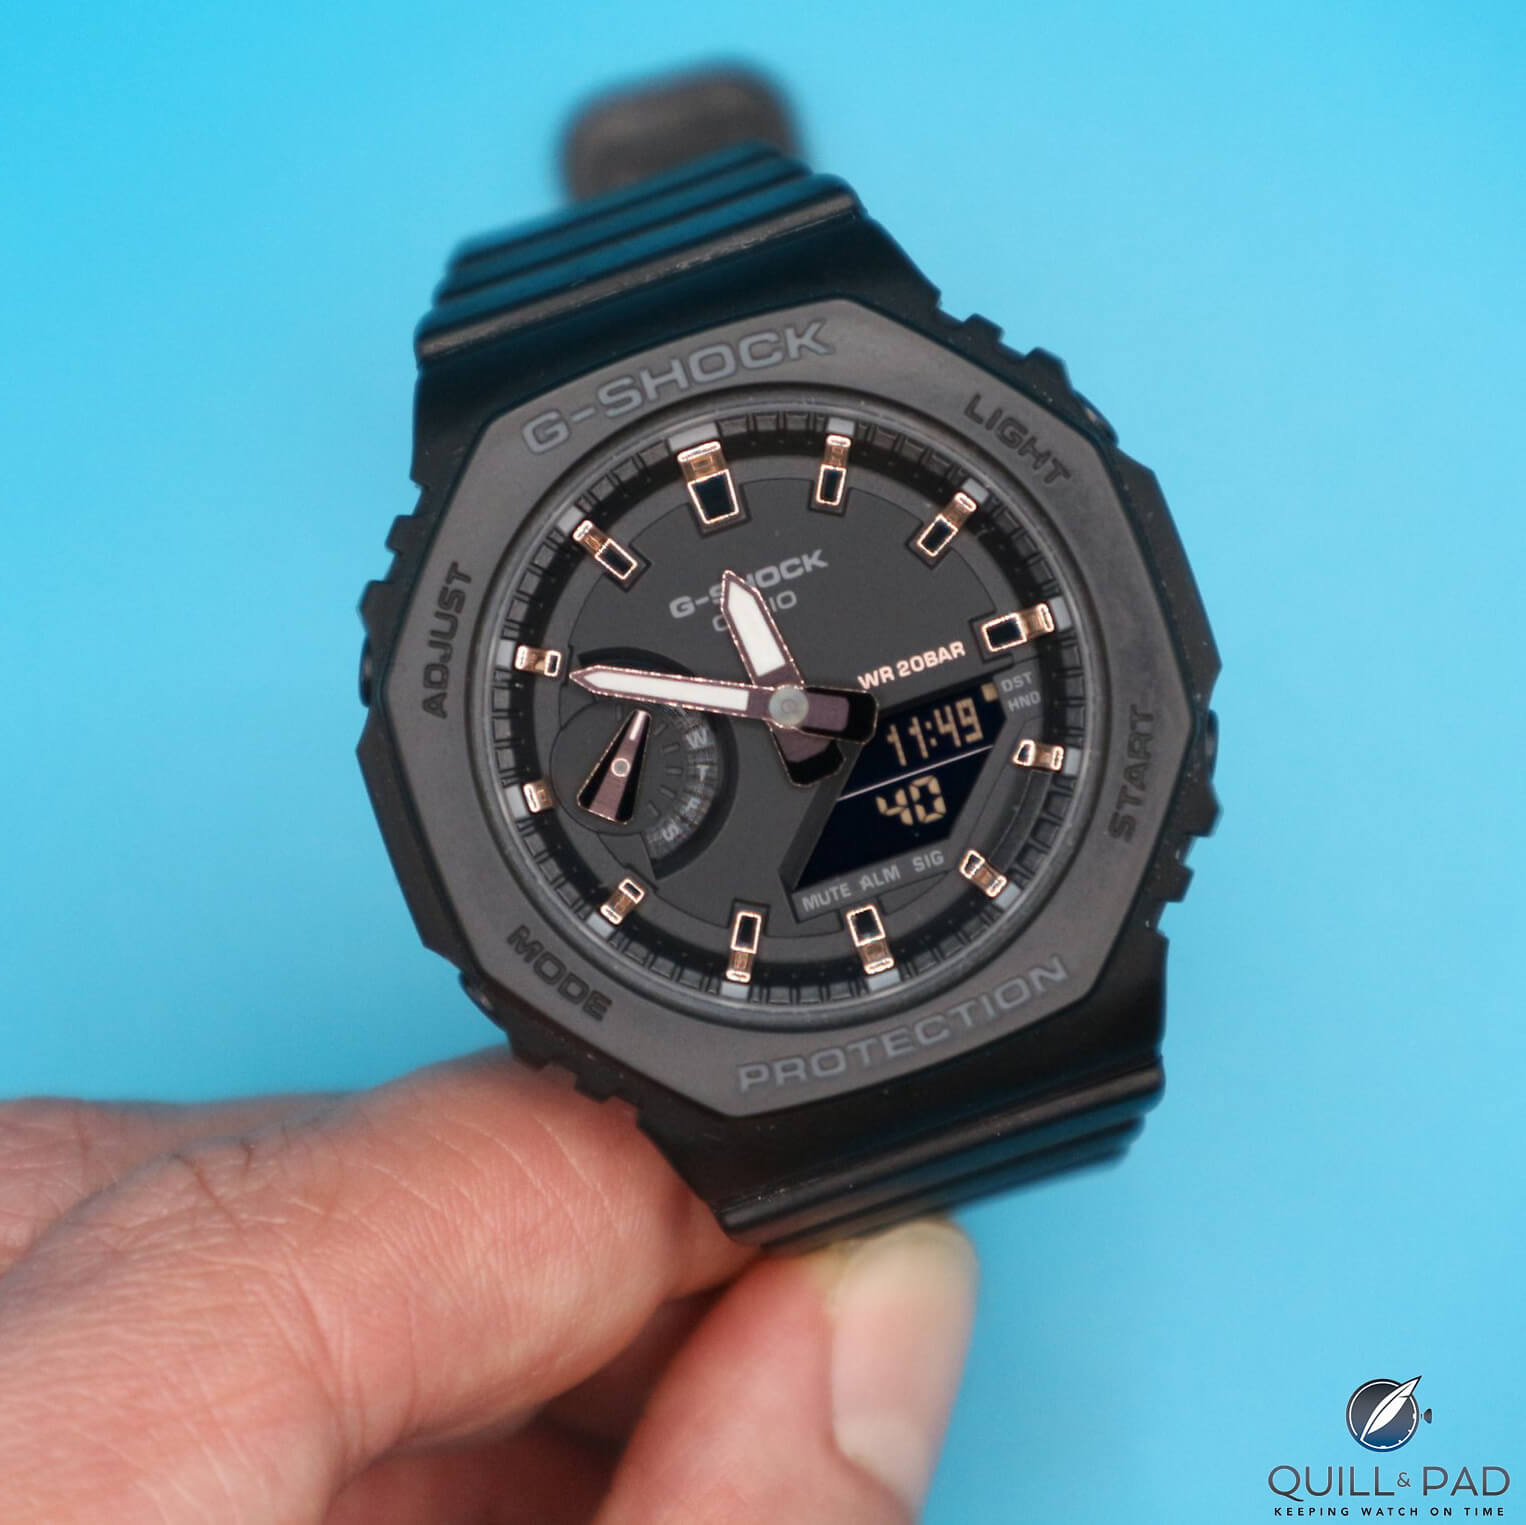 7 Reasons Why You Should Own a Casio G Shock Watch